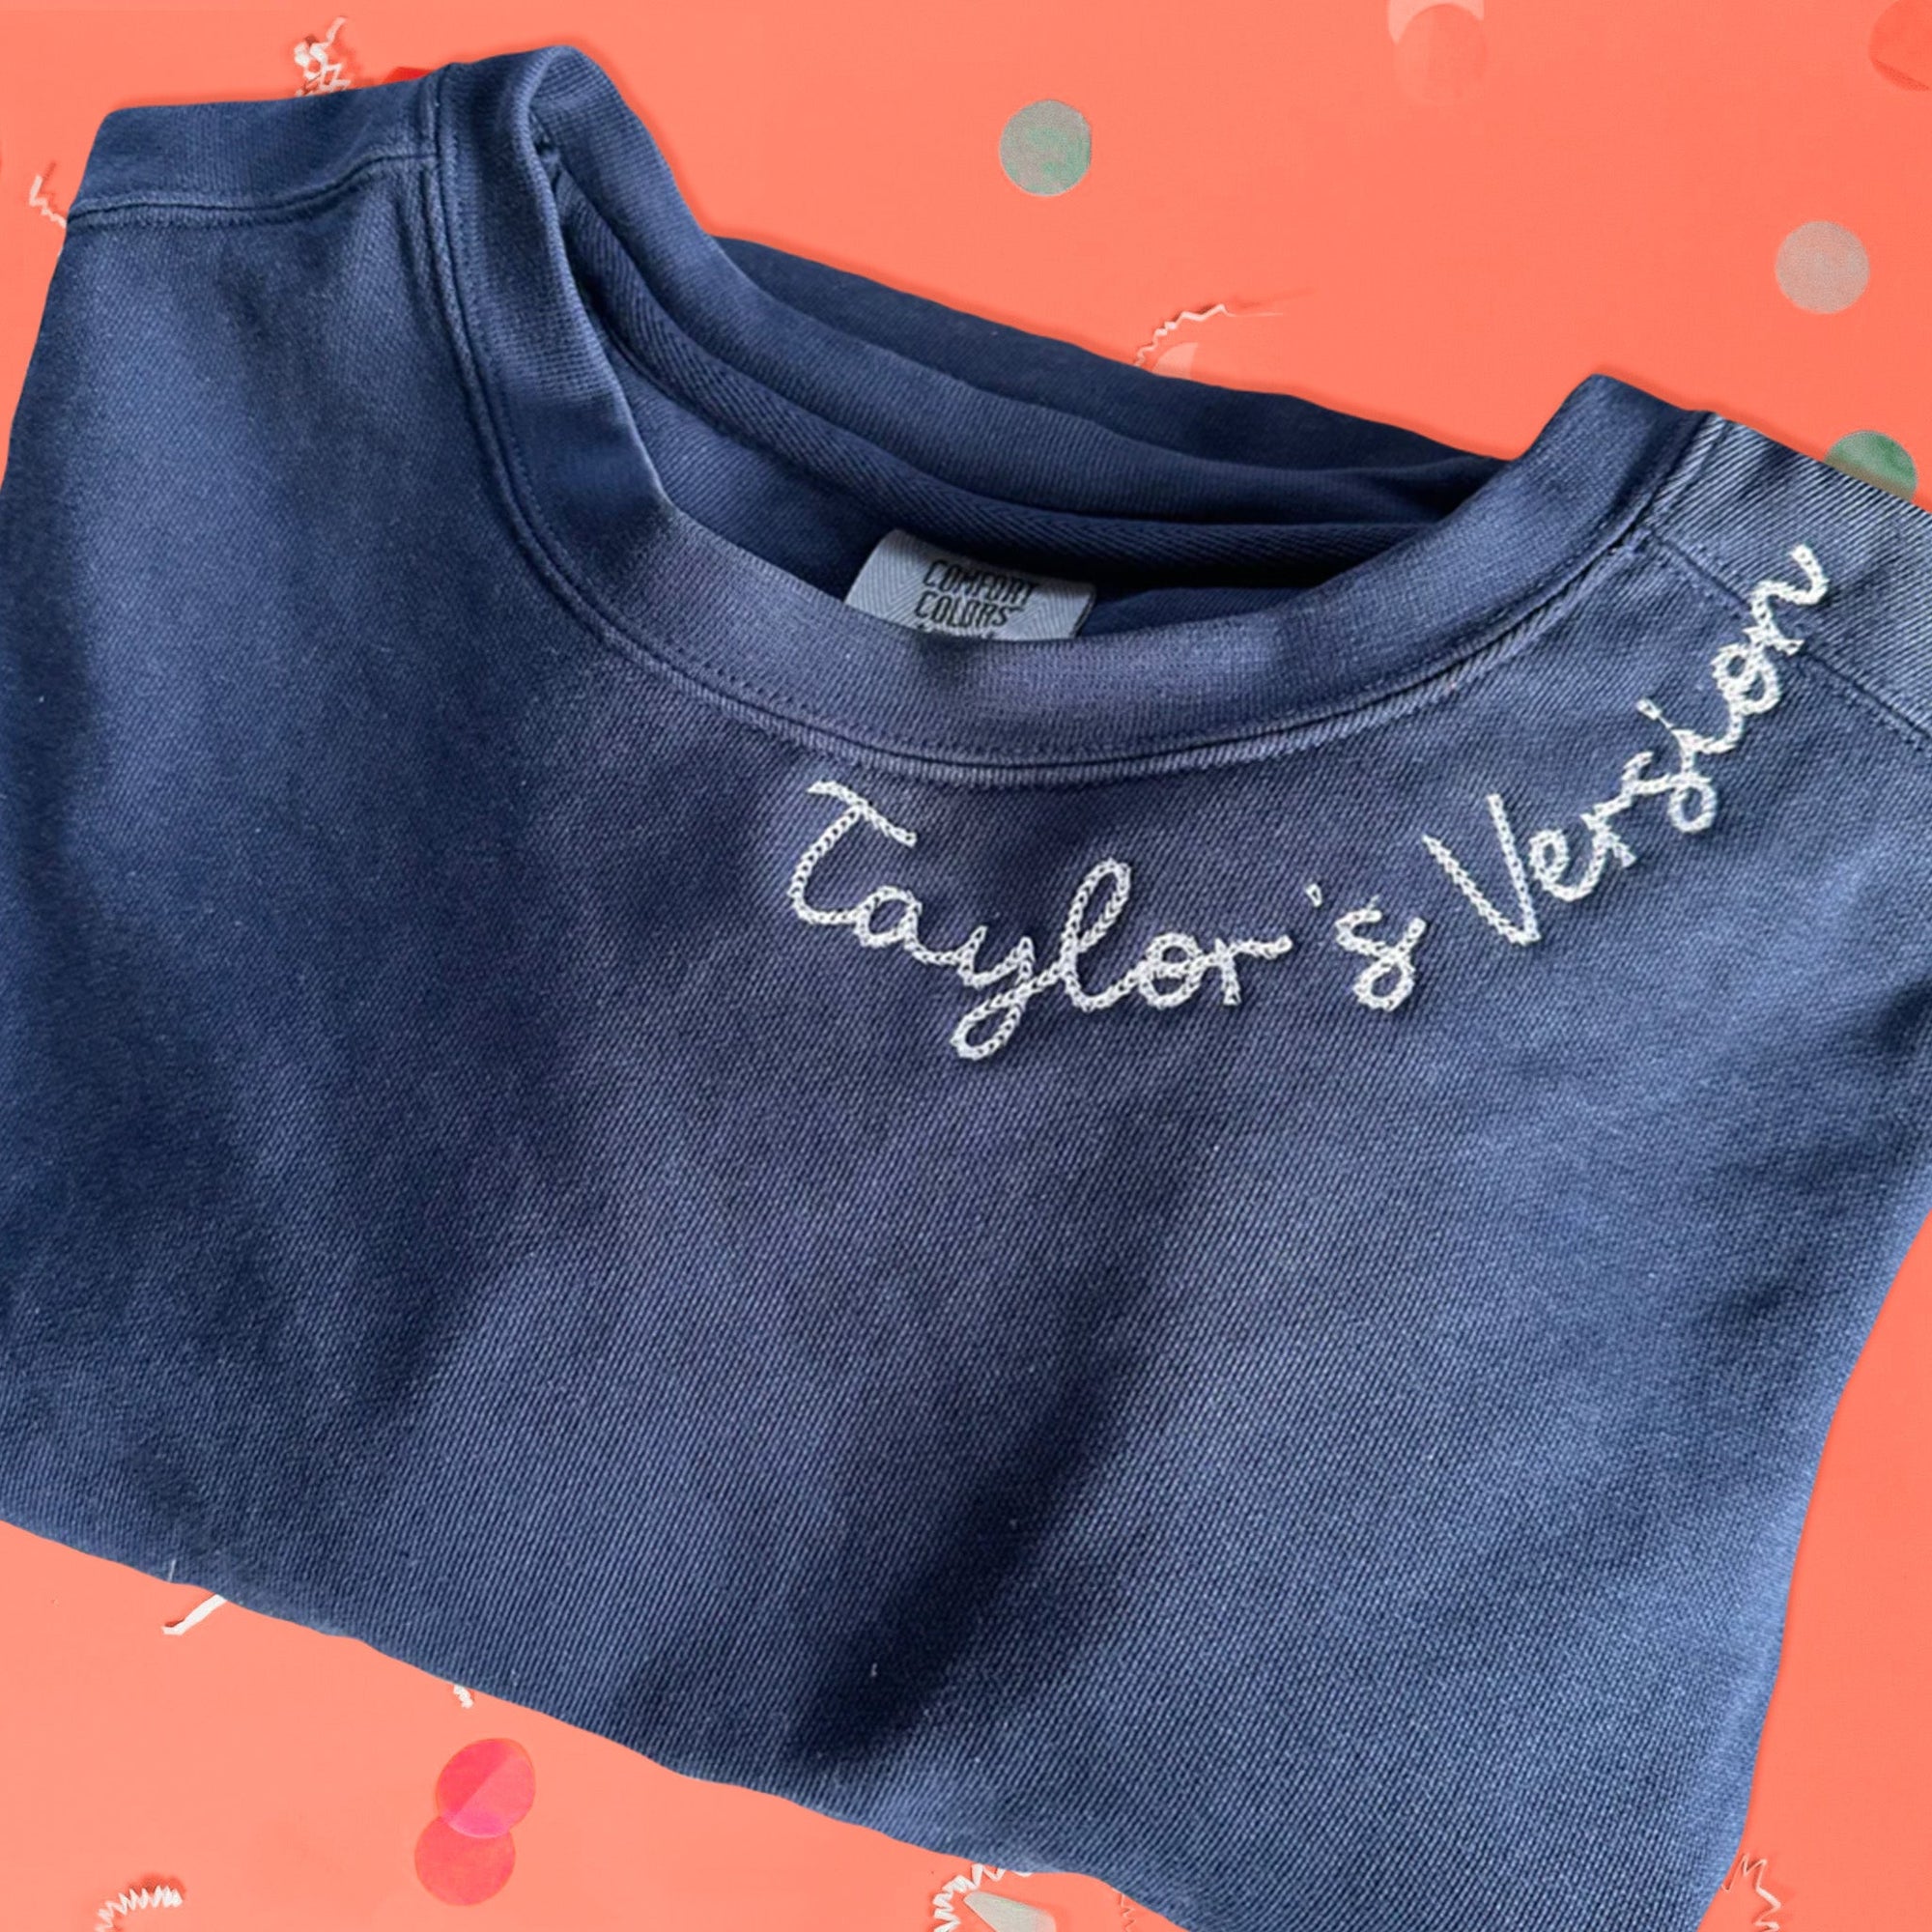 On a pink coral background sits the front of a sweatshirt with white crinkle and big, colorful confetti scattered around. This Taylor Swift Inspired crewneck navy sweatshirt has white chain stitched script lettering around the neck and it says "Taylor's Version."